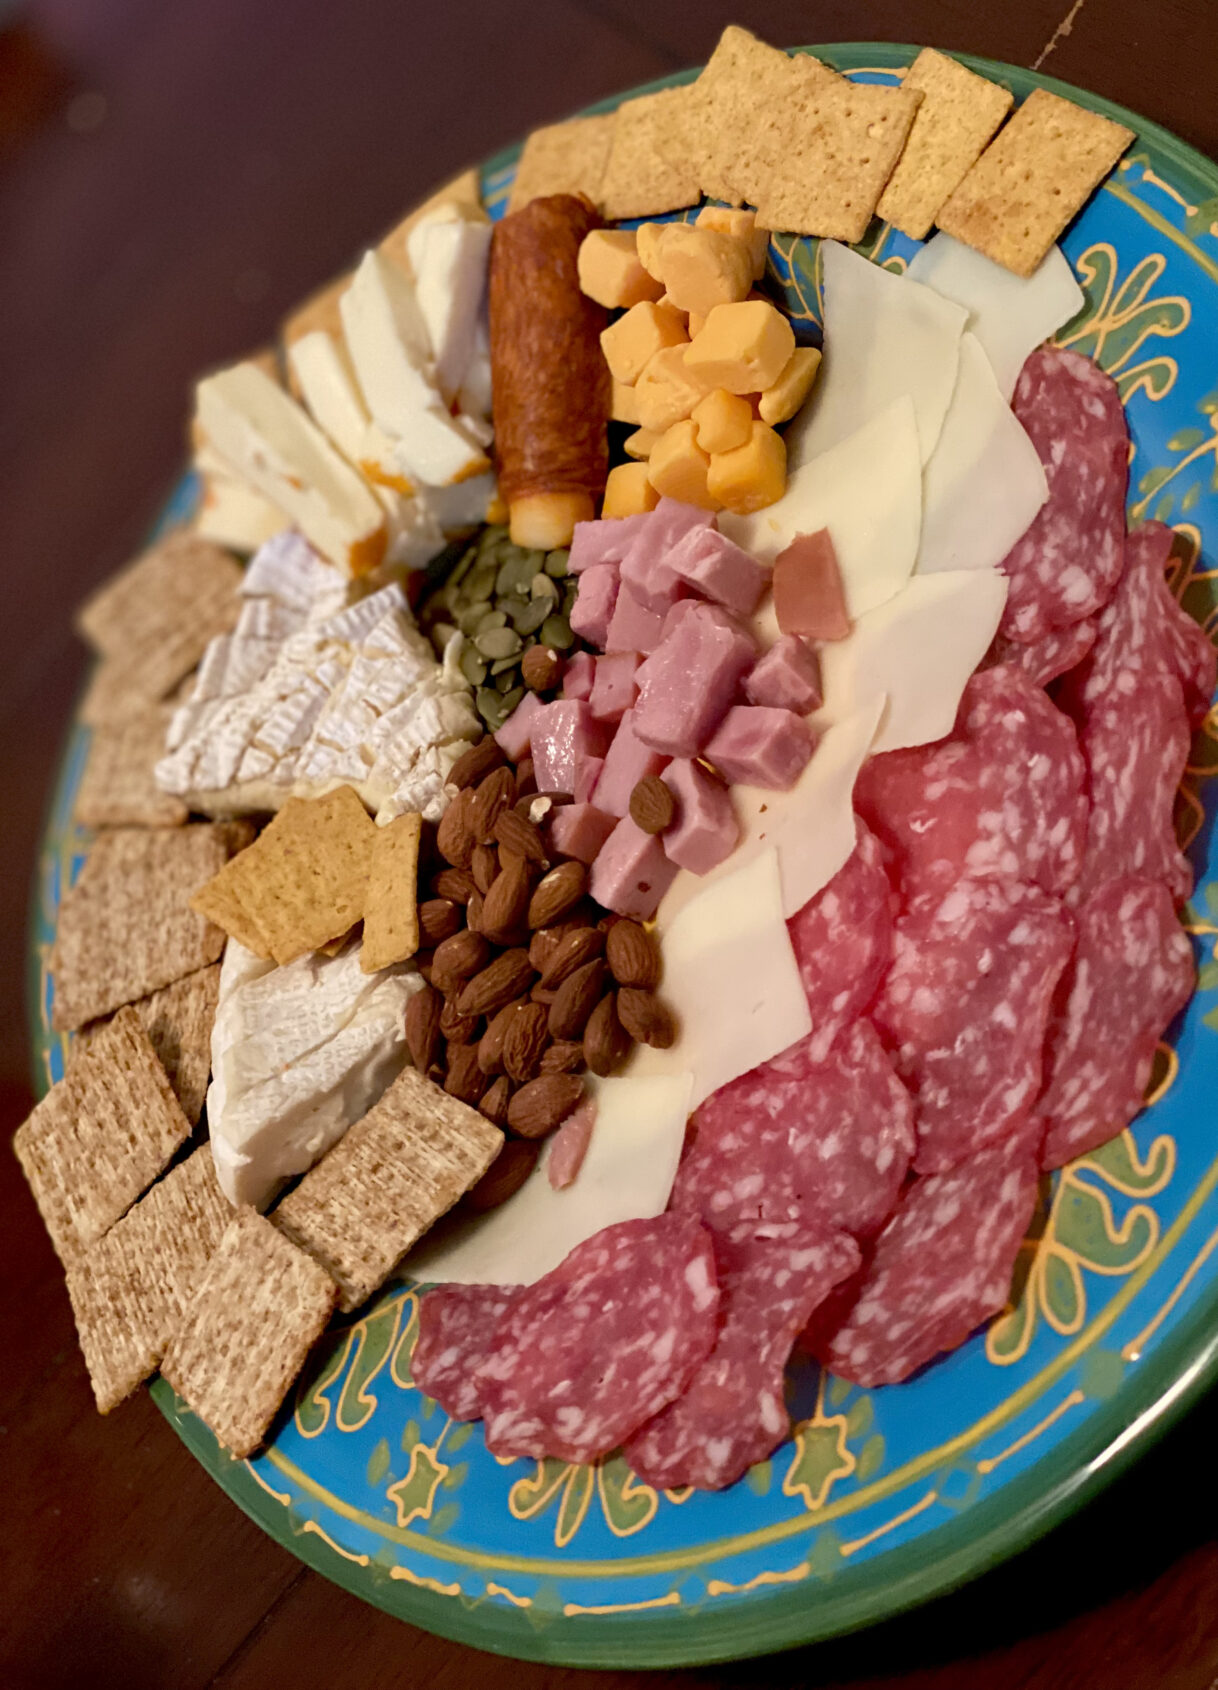 My Attempt at a Charcuterie Board – Athens, Georgia – 01/20/2022